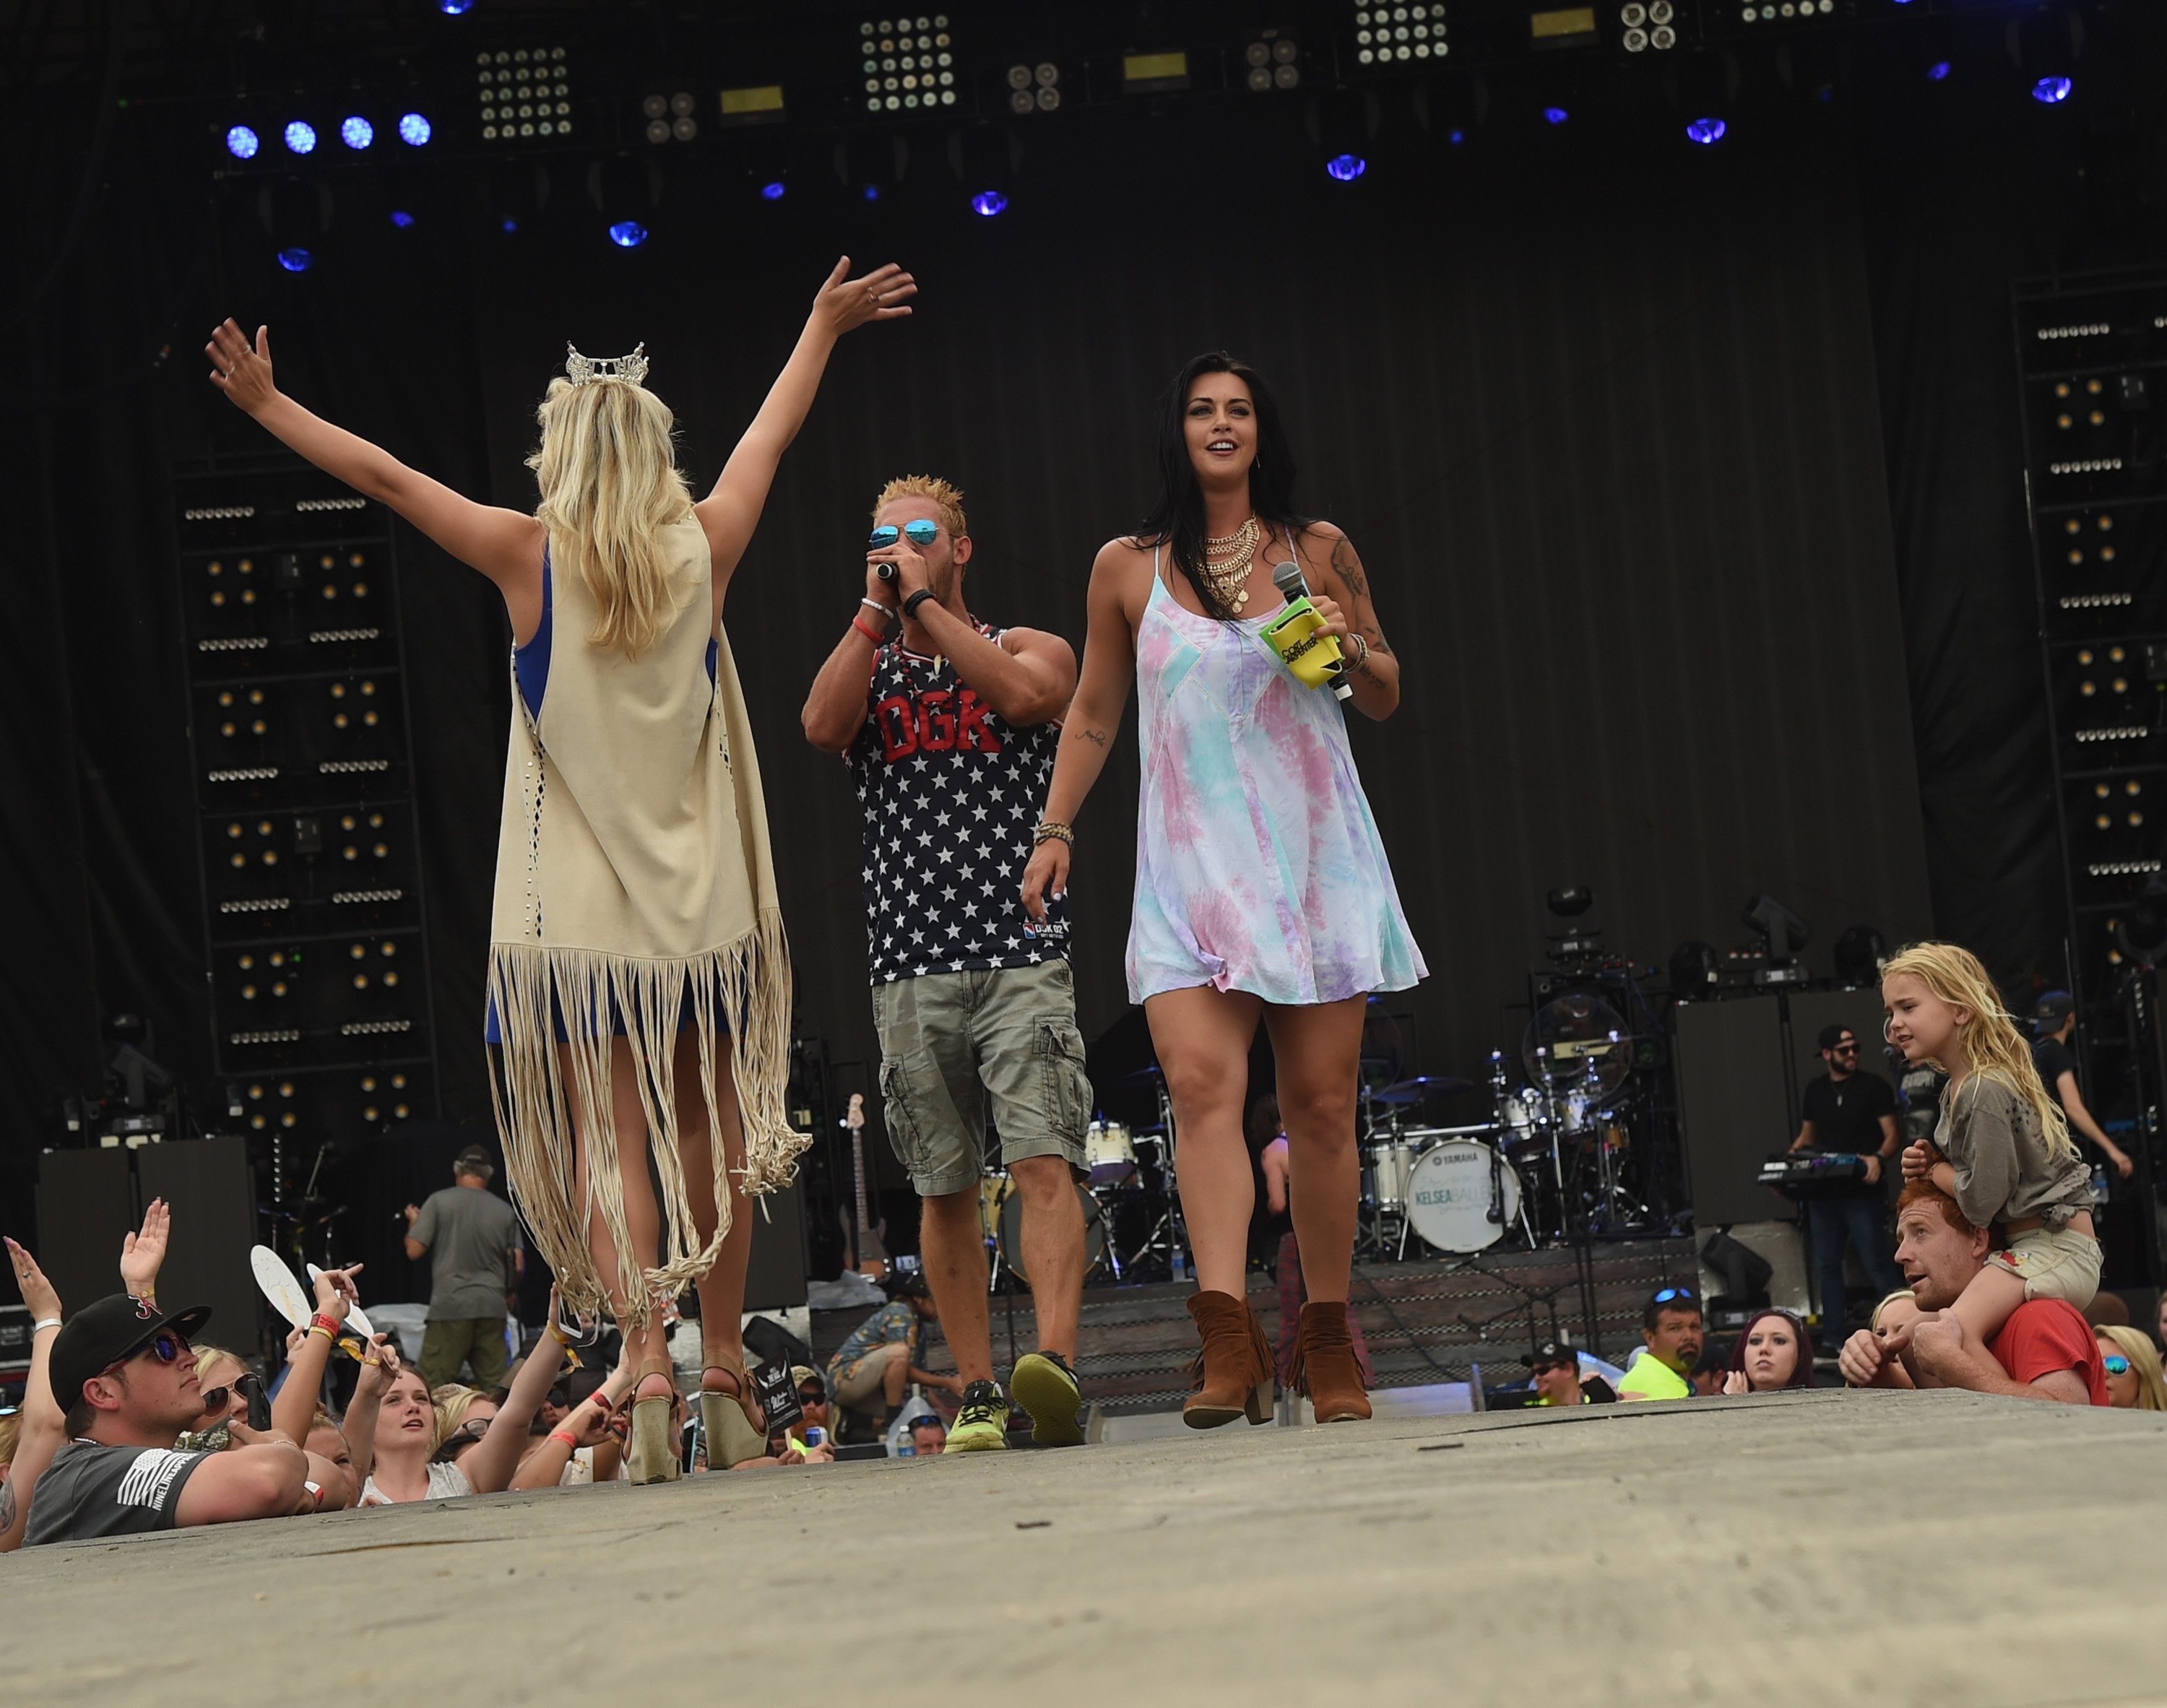 Miss Alabama 2015 Maggie McGuffin (Crown on Head) and CMT's Party Down South cast members Ryan "Daddy" Richards and Mattie Breaux attend Pepsi's Rock The South Festival - Day 2 at Heritage Park